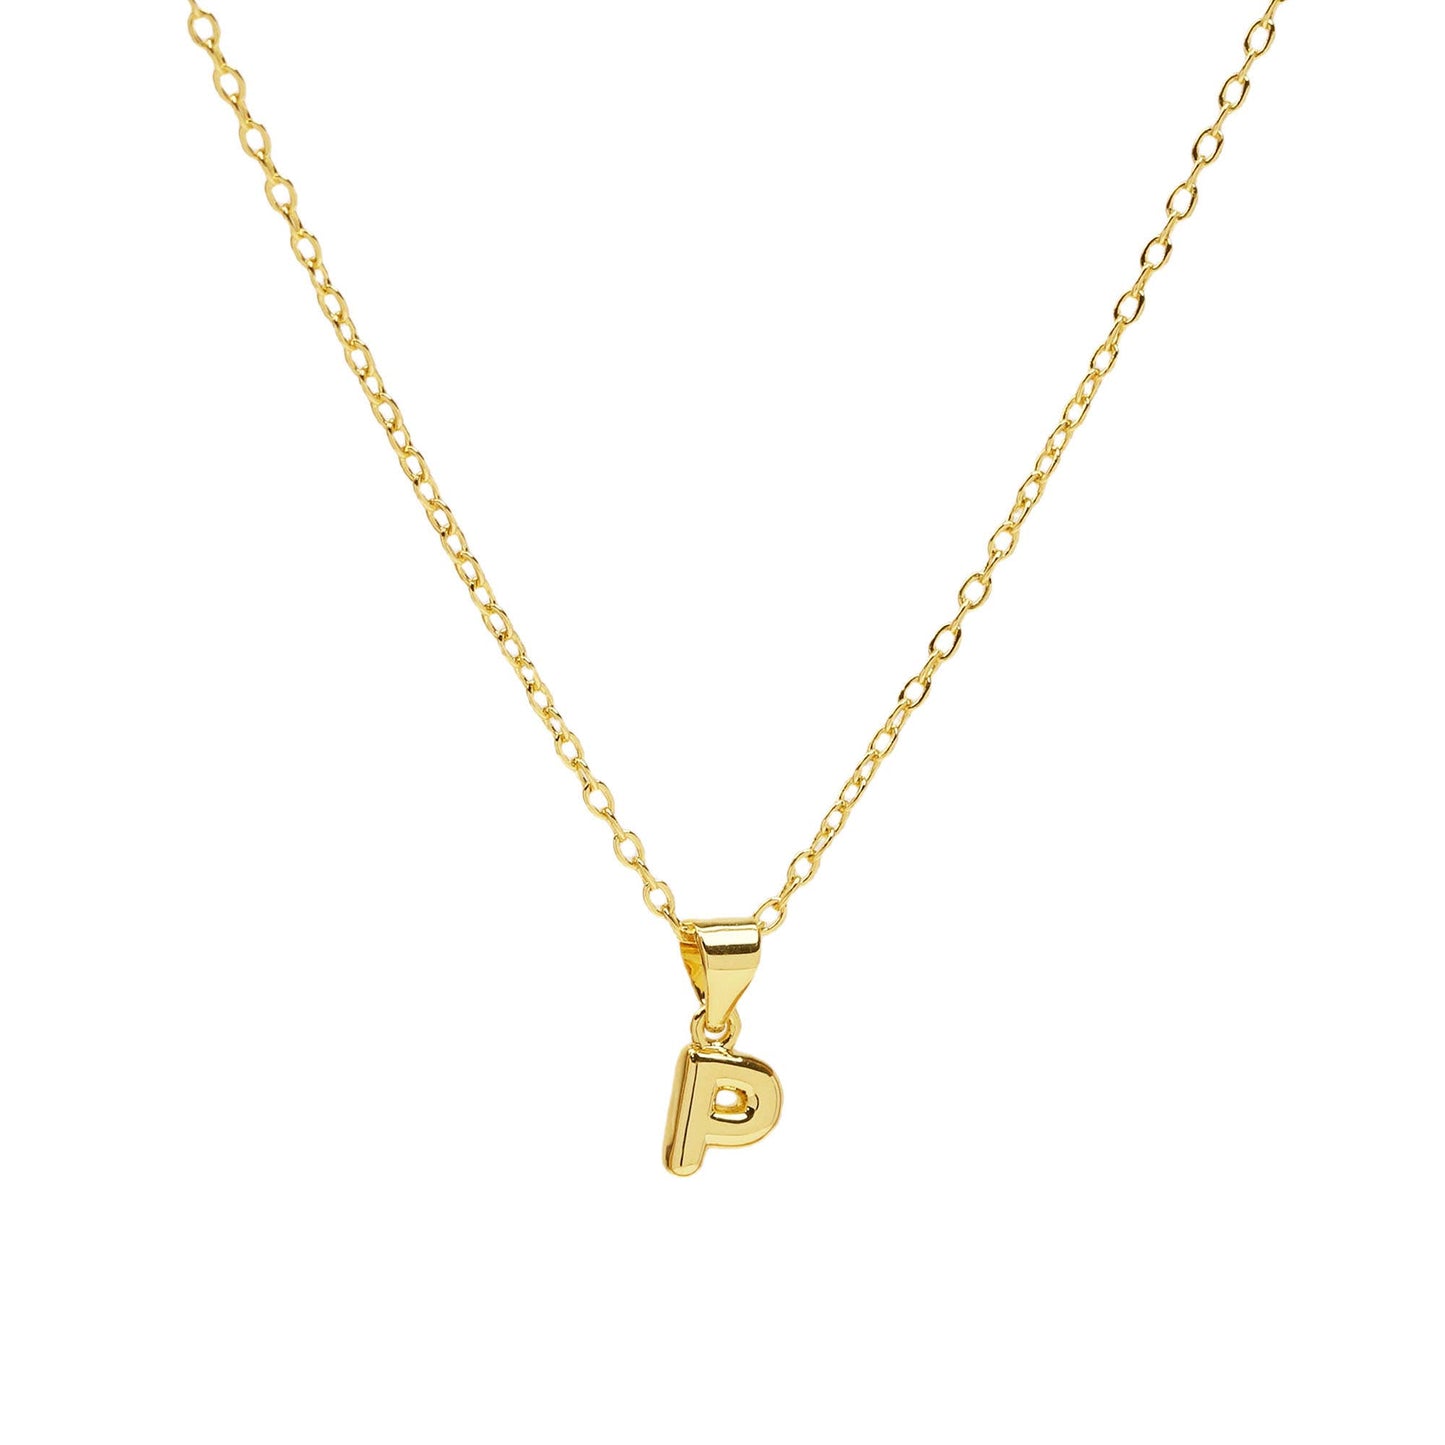 Initial Mini Balloon Bubble 18K Gold Necklace: N